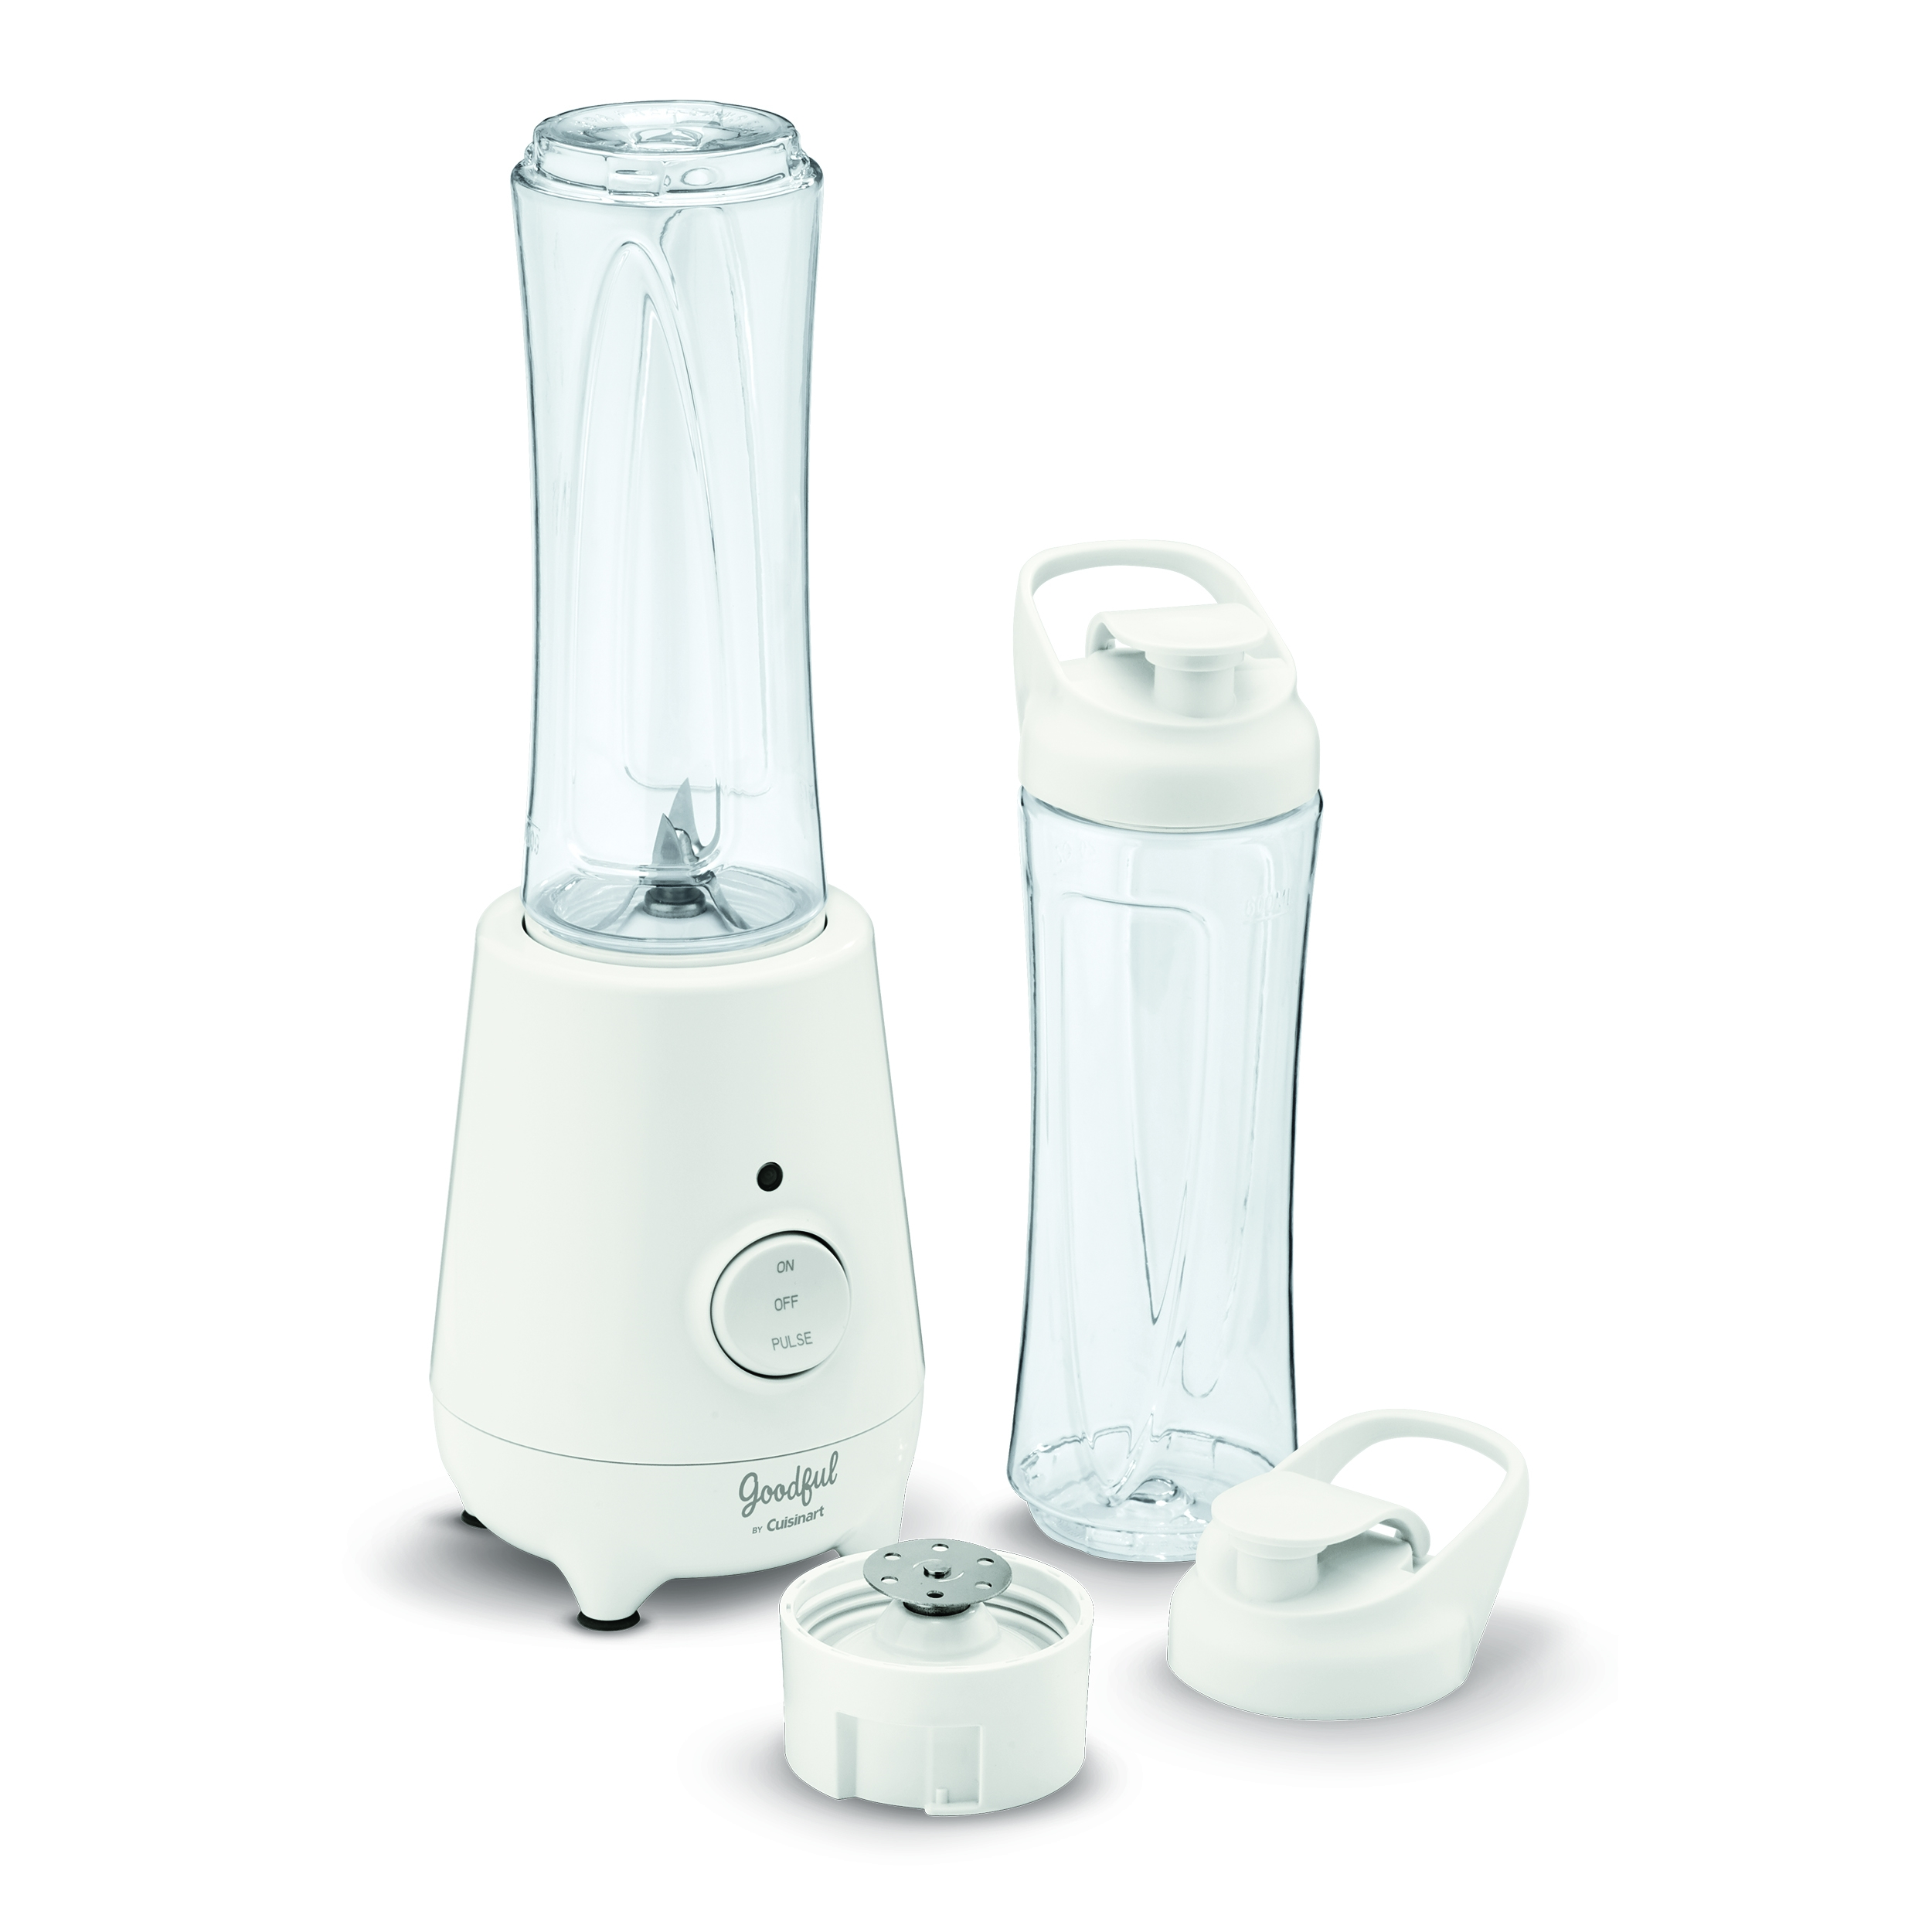 Discontinued Compact To Go Blender